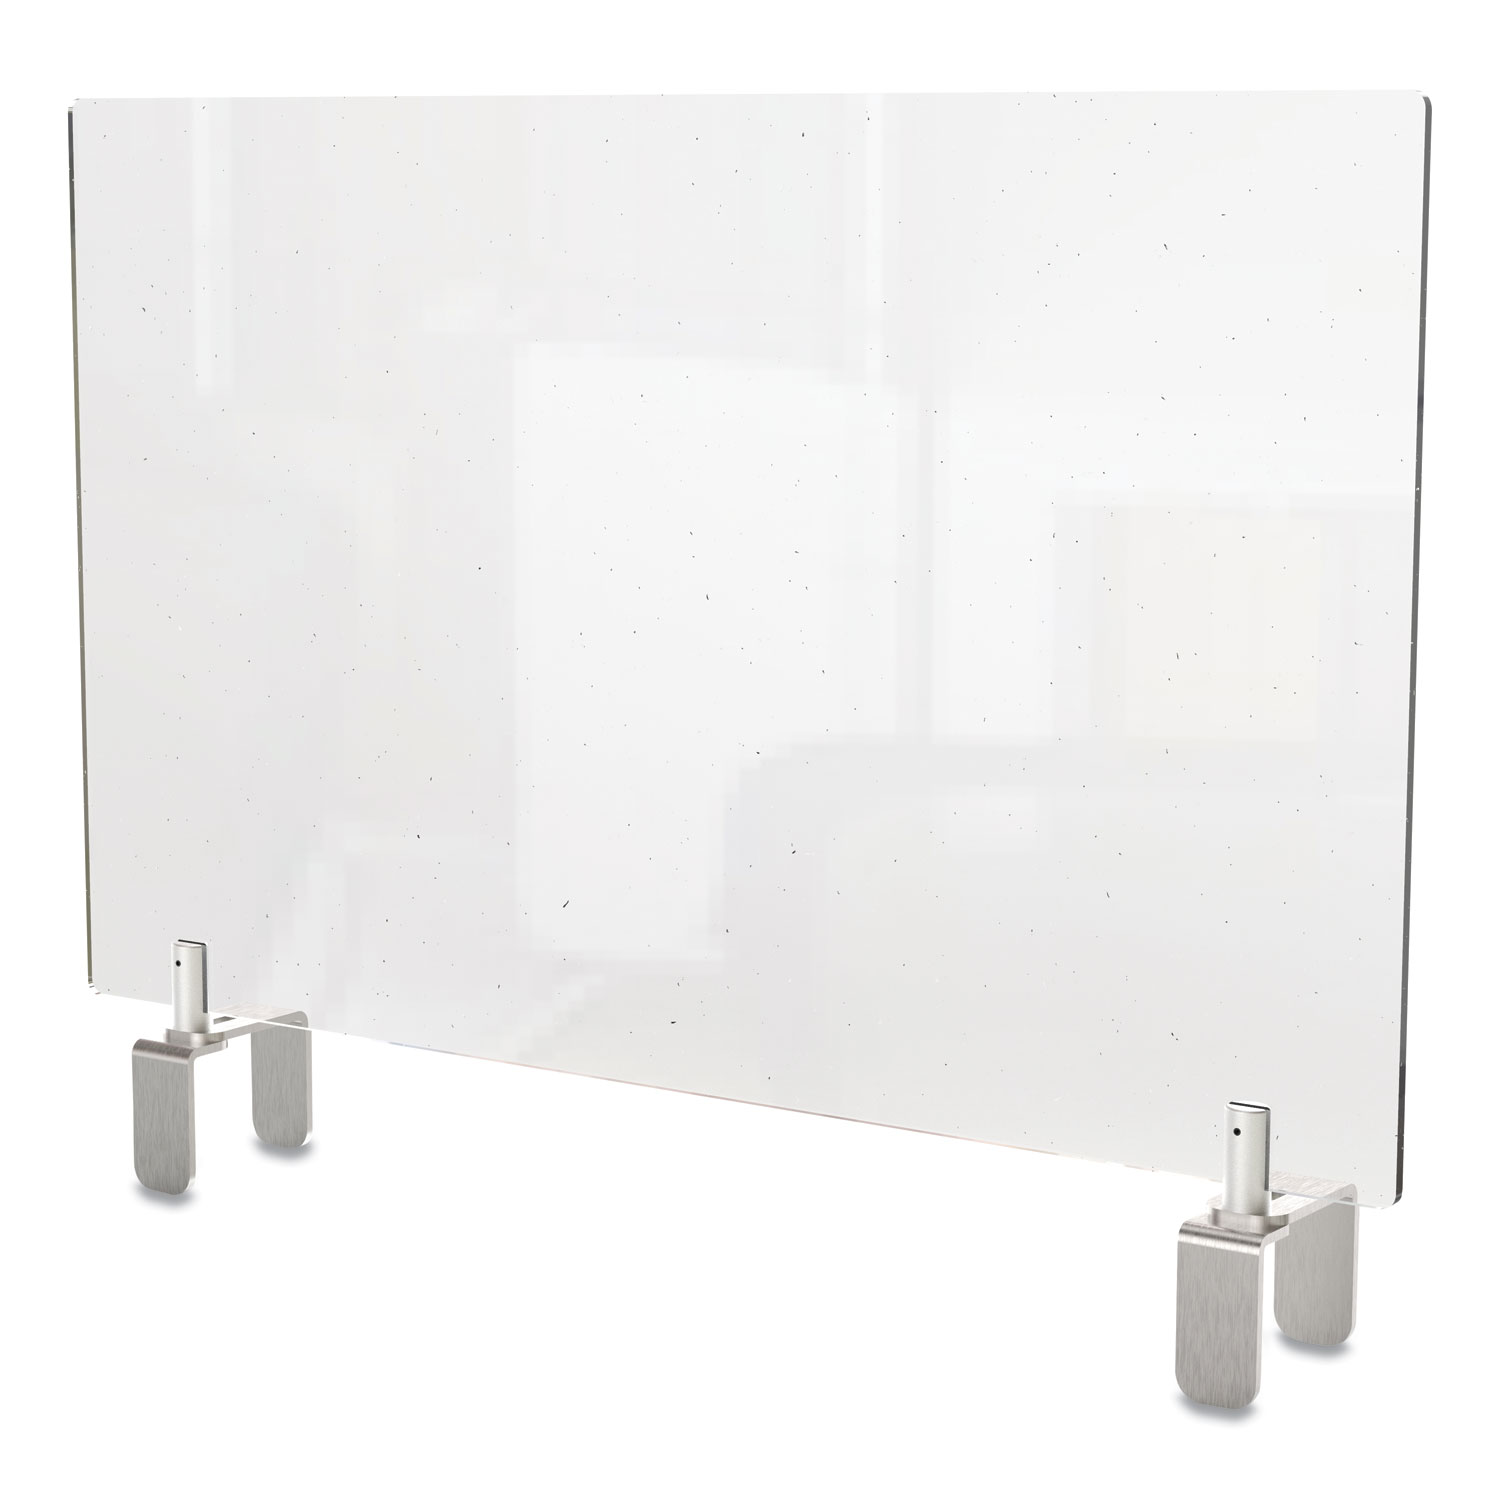  Ghent PEC1829-A Clear Partition Extender with Attached Clamp, 29 x 3.88 x 18, Thermoplastic Sheeting (GHEPEC1829A) 